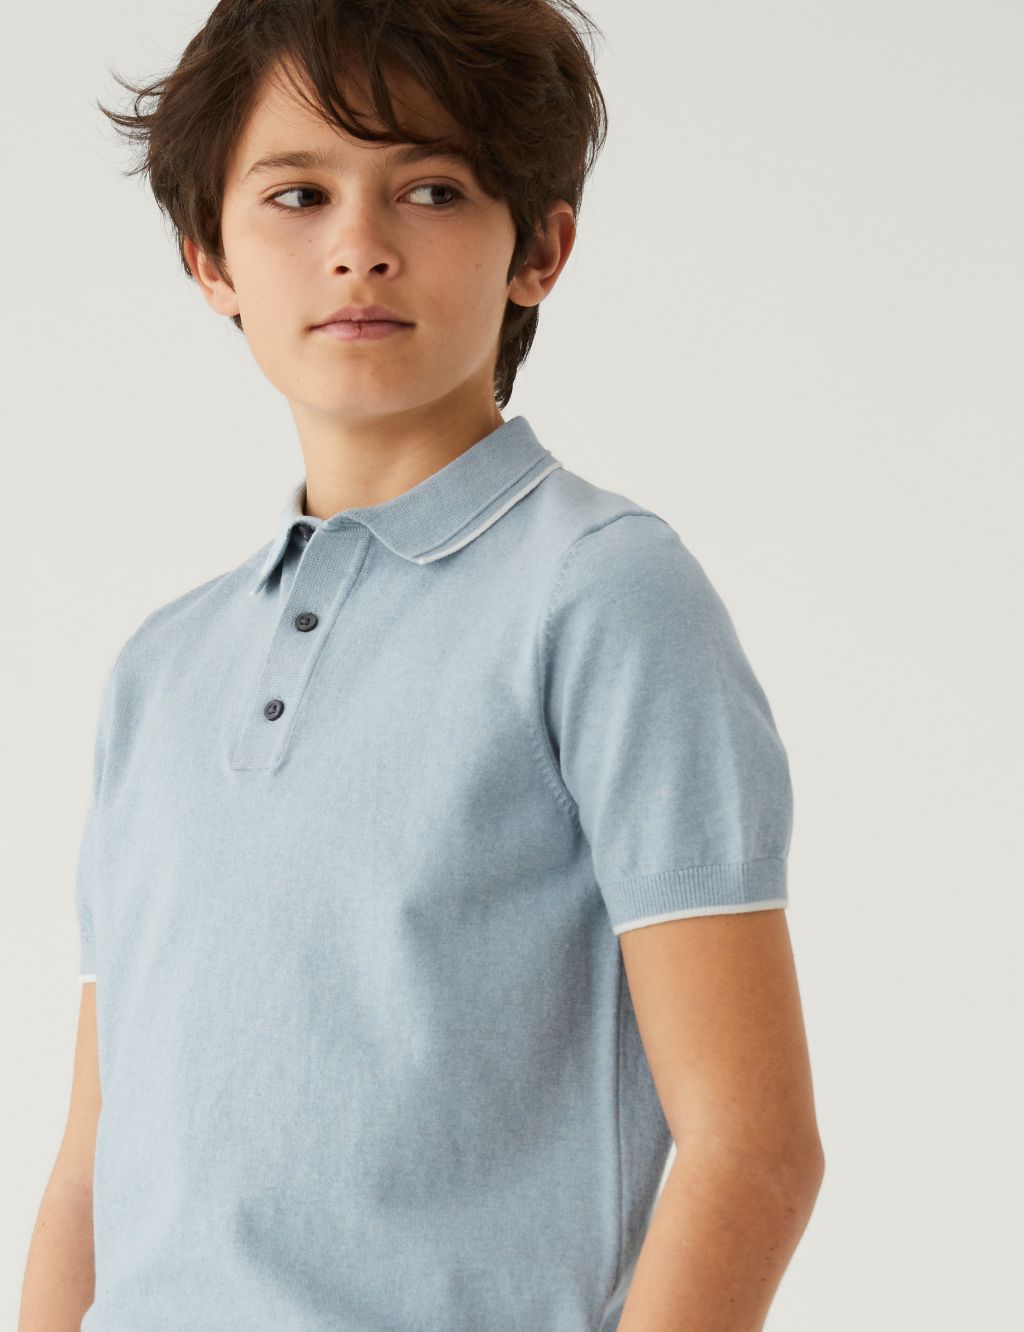 Cotton Rich Knitted Polo Shirt (6-16 Yrs) image 1